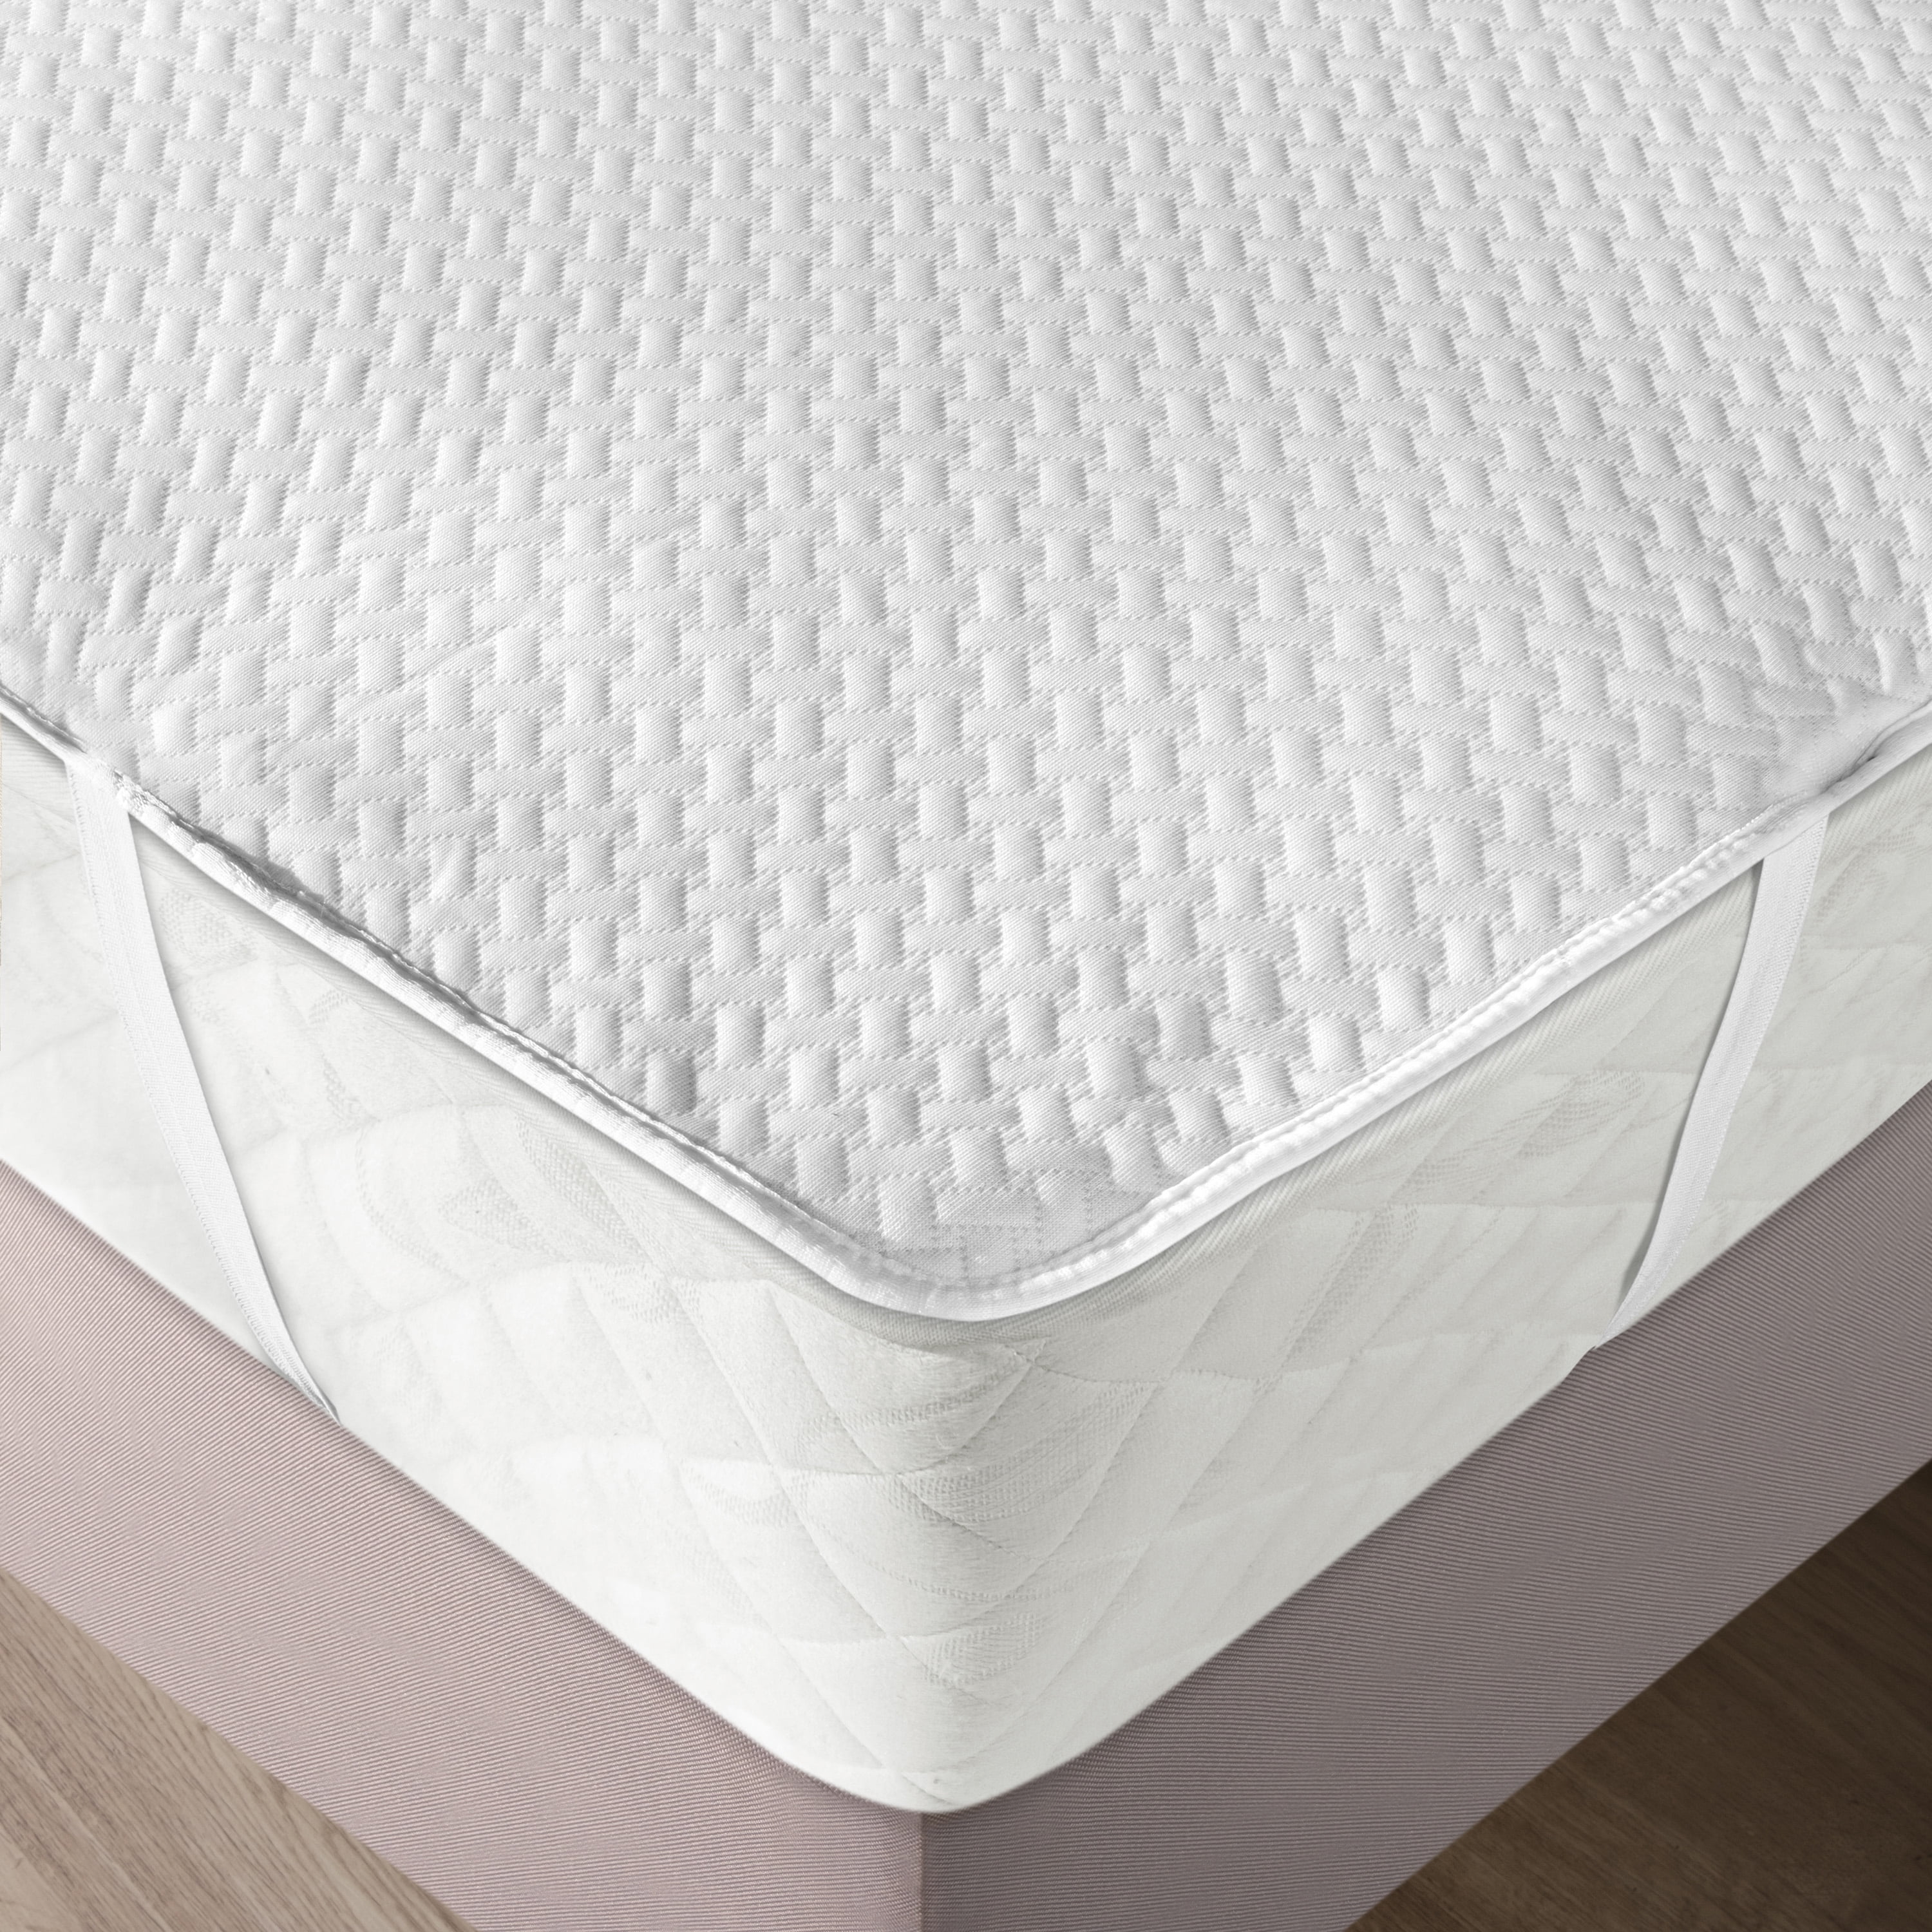 210 x 210 30 Cm Drop! VICTORIA BEDDING Terry Cotton Waterproof Mattress Protector-Fitted Style White Solid Emperor Size